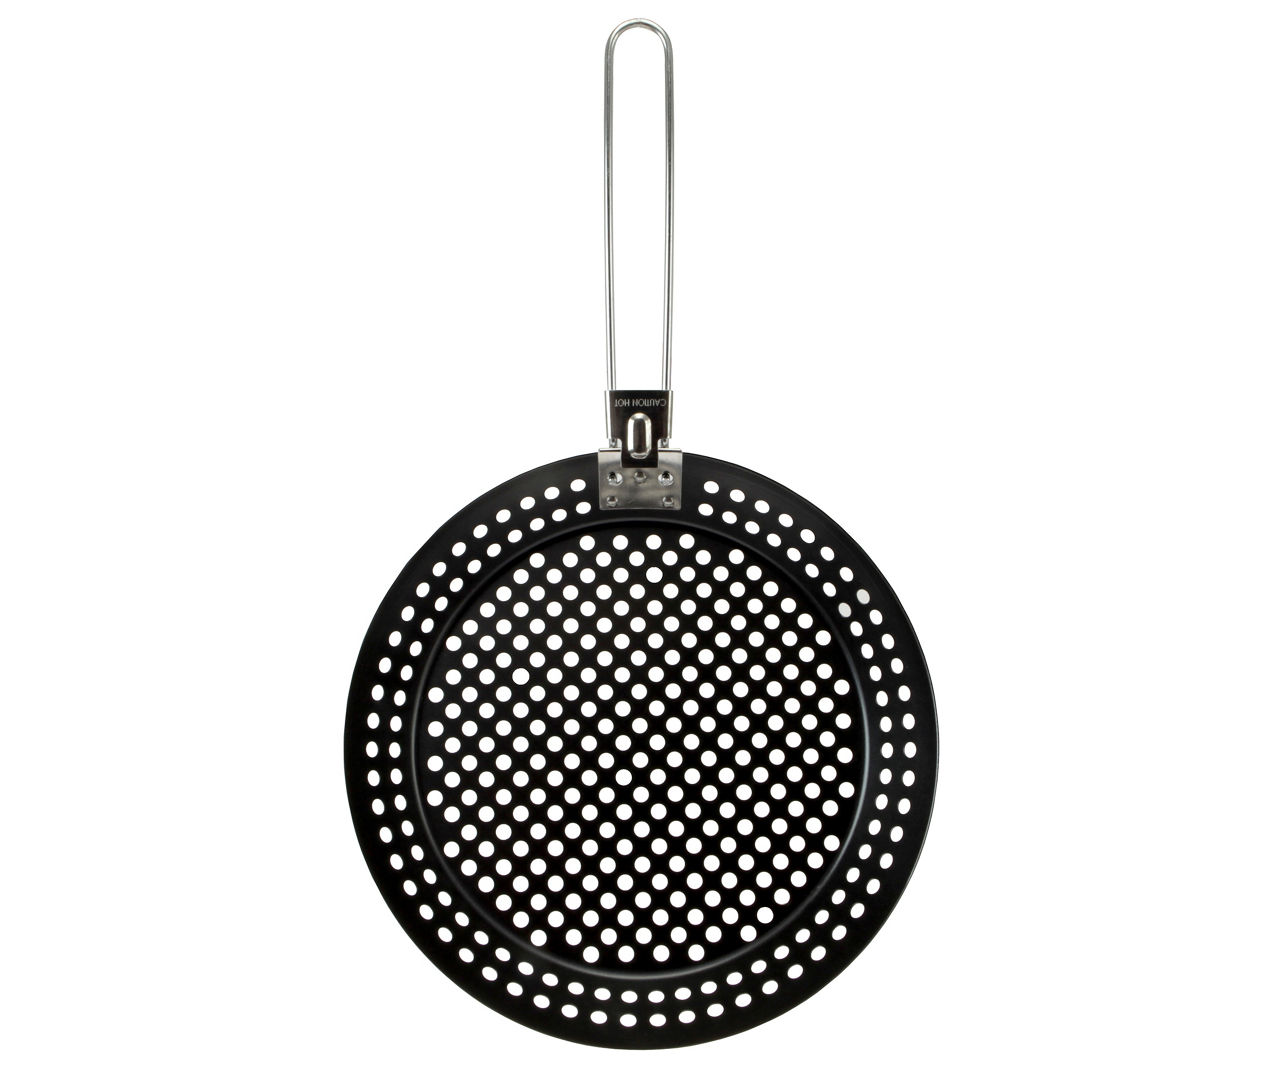 Outset Non-Stick, Grill Skillet with Removable Handle - Keystone